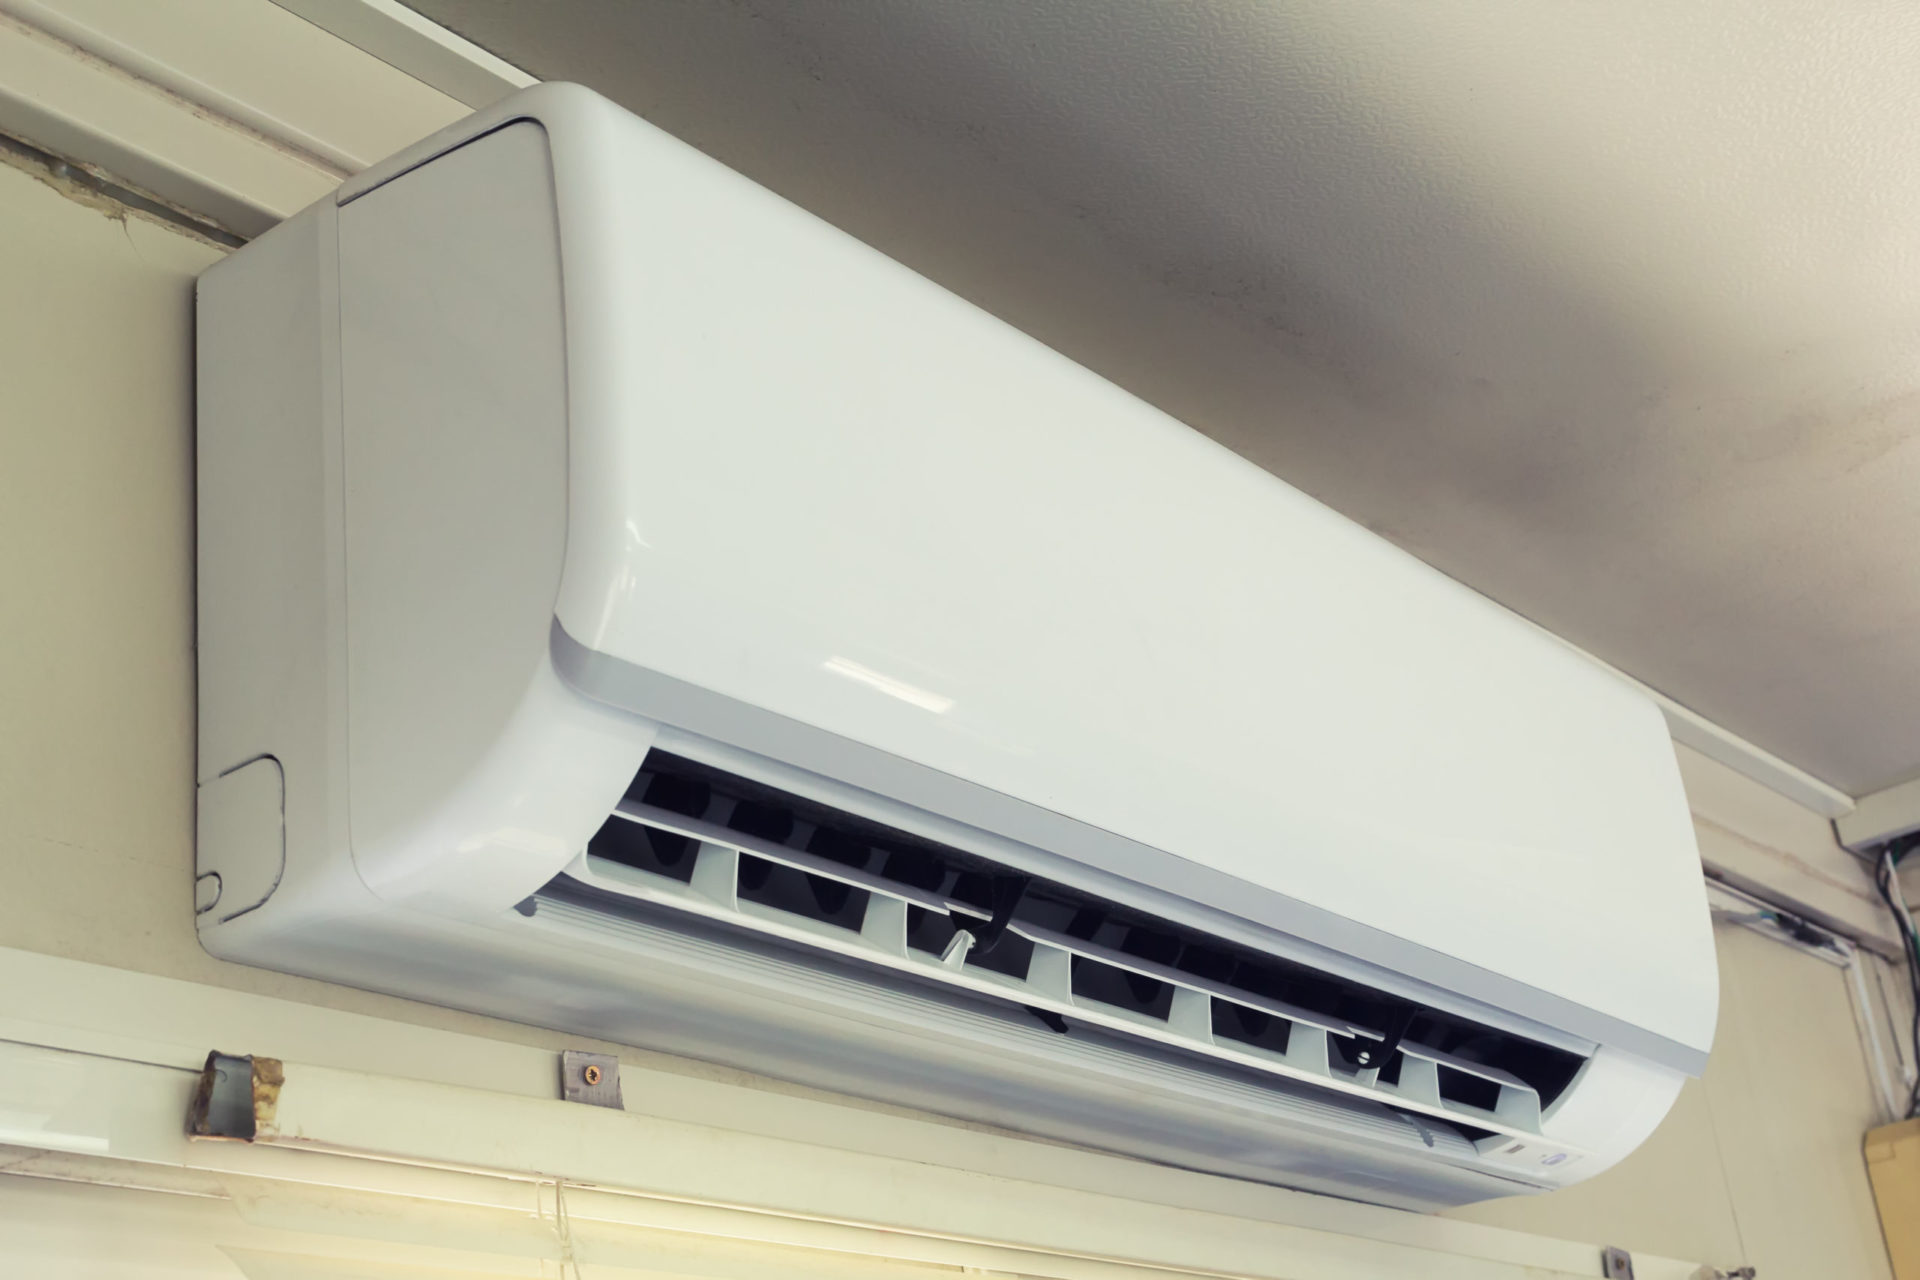 ductless mini-split services air conditioning General Air Conditioning & Plumbing